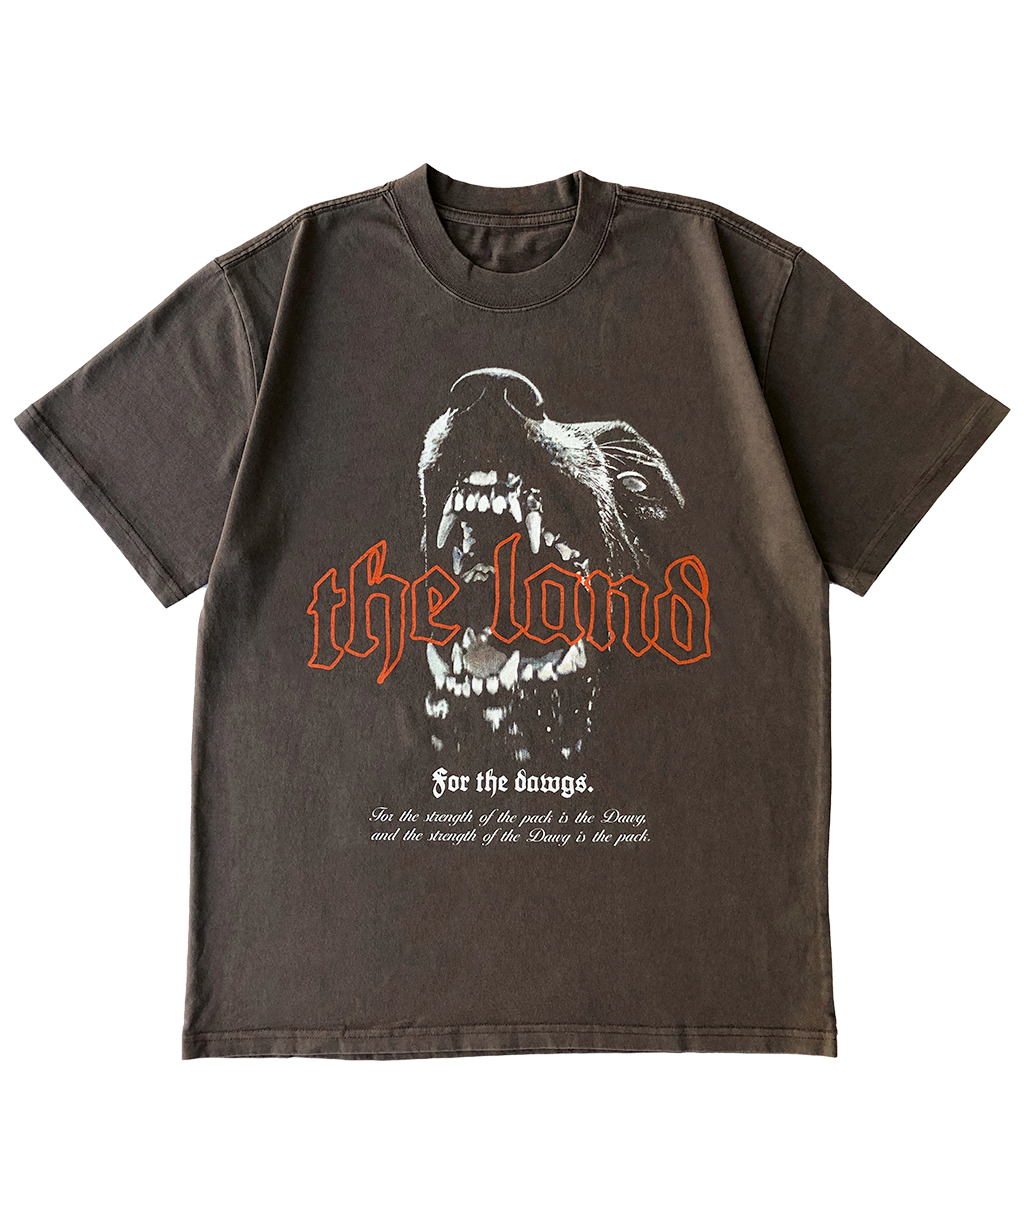 "For the Dawgs" T-shirt (Vintage Brown)